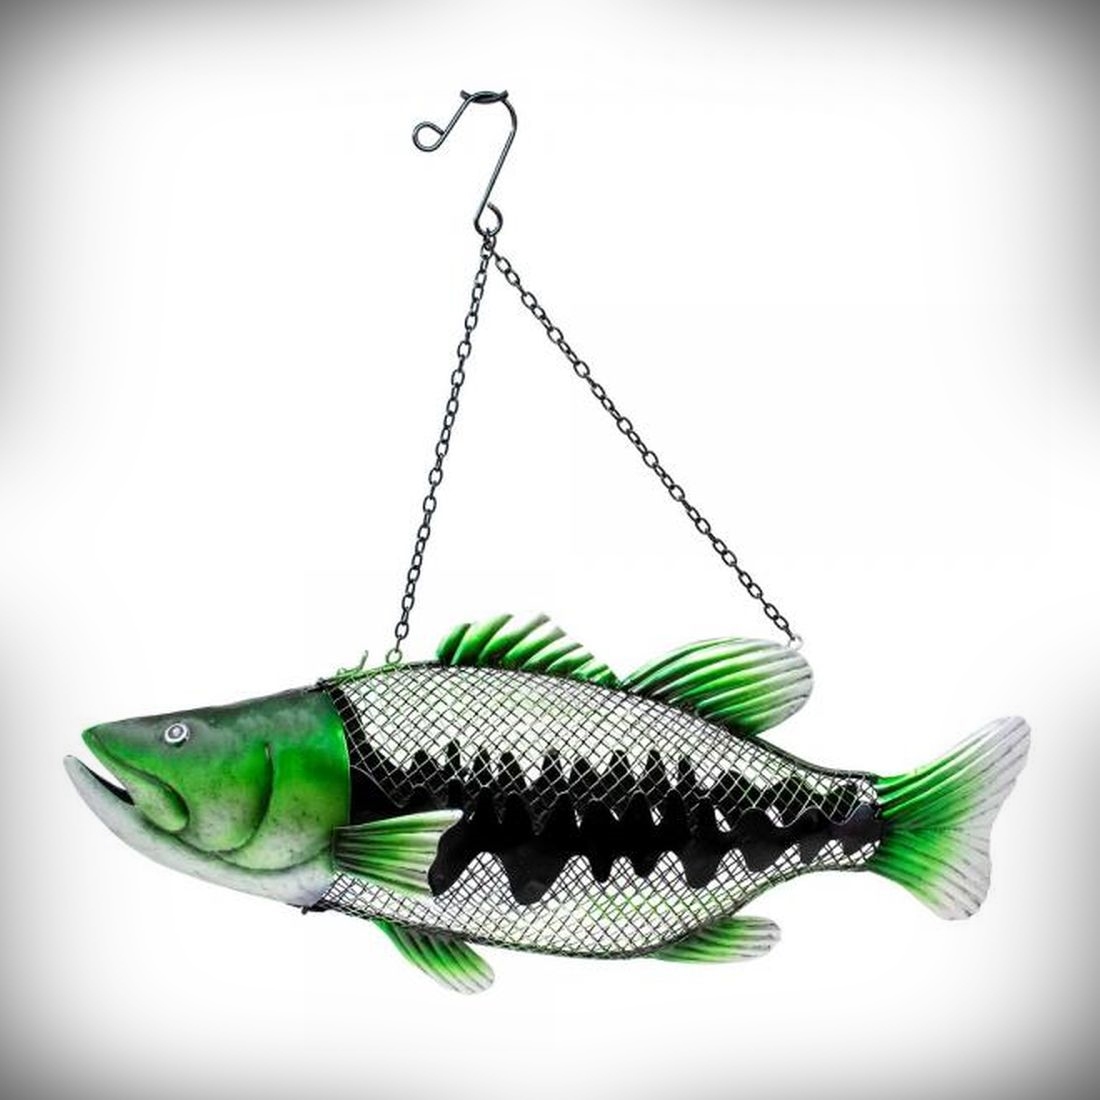 For The Birds Gord-O Fishing Lure Bird House, Handcrafted Round